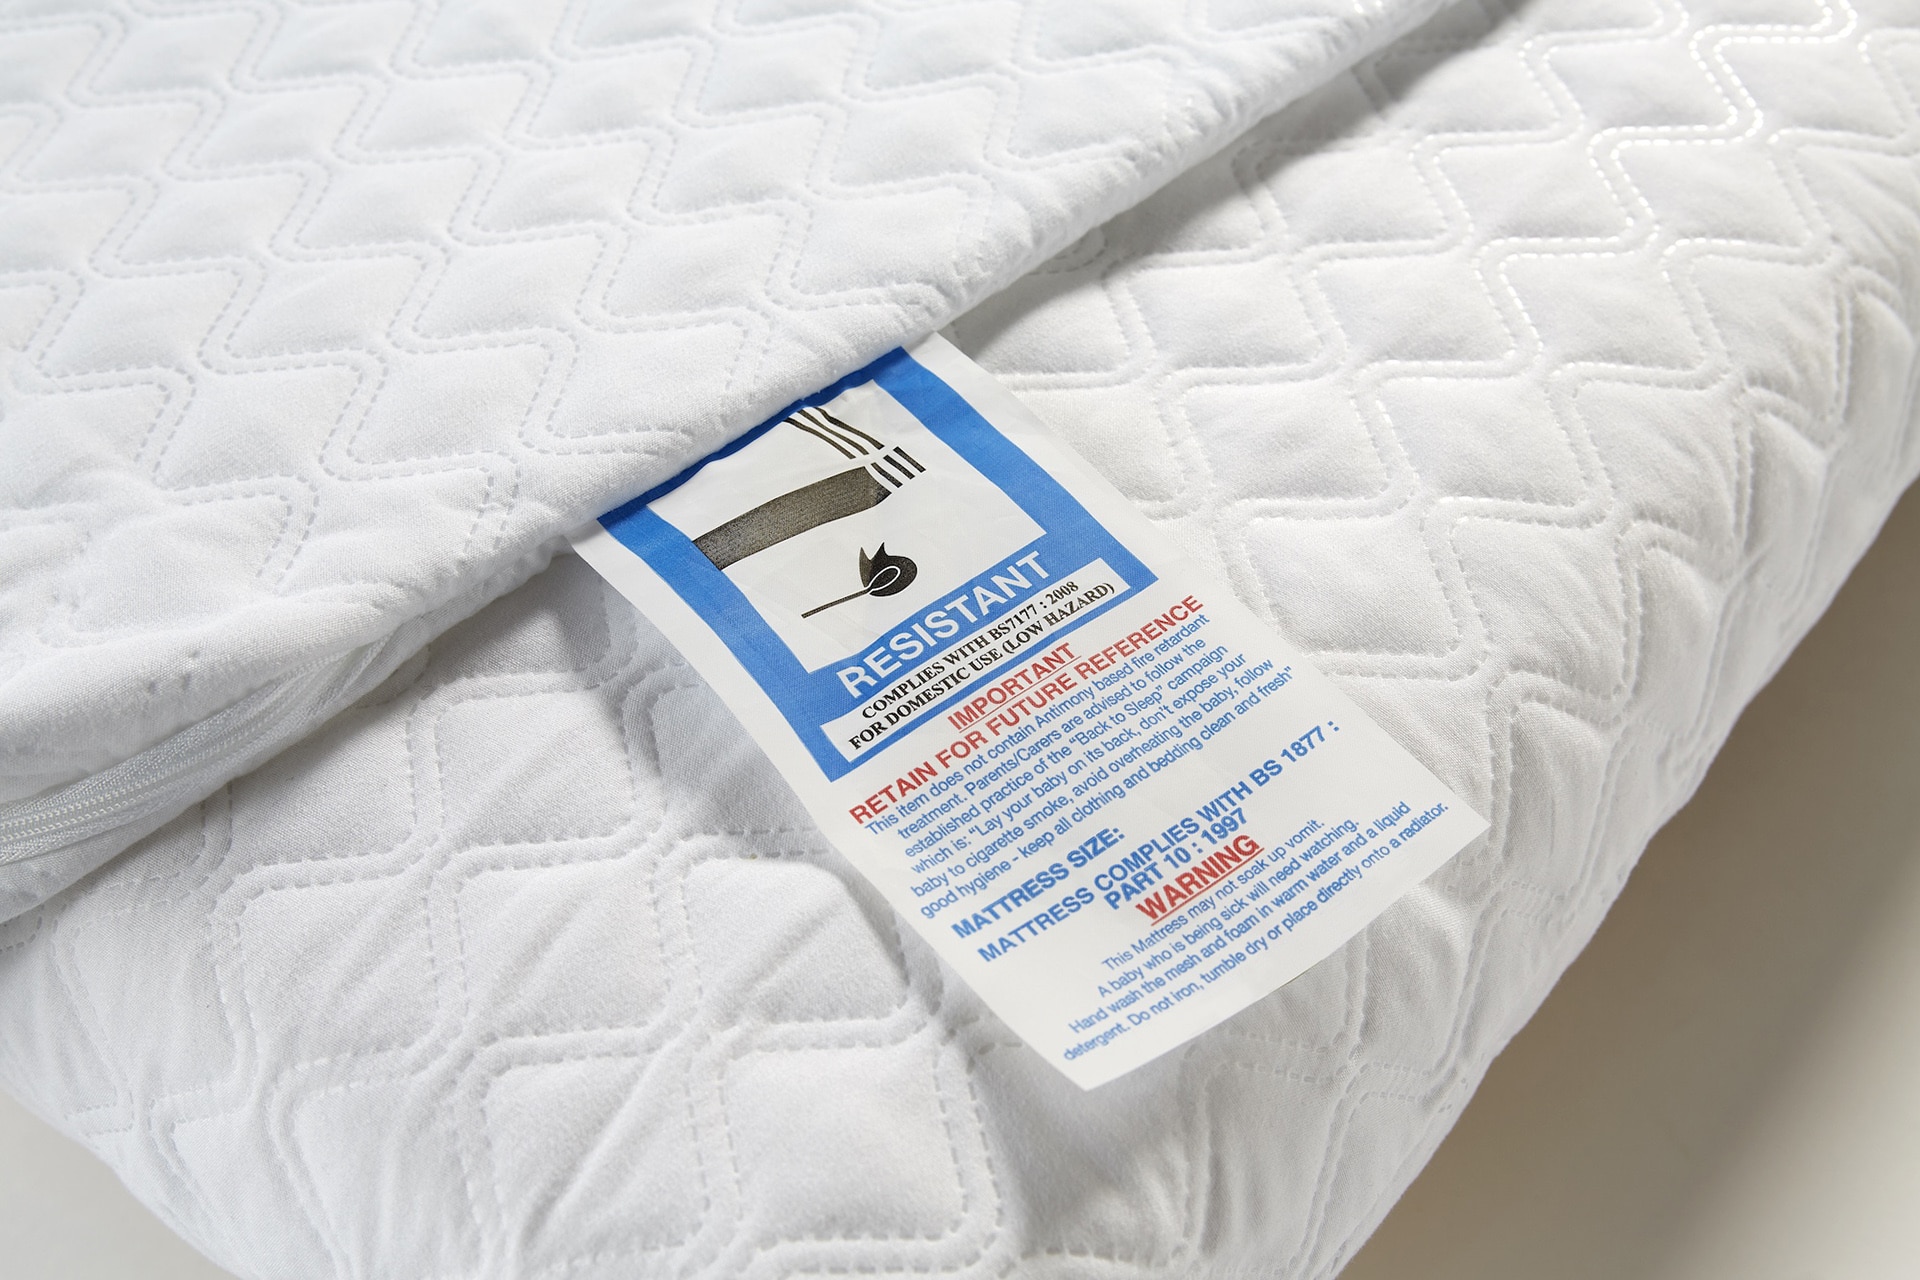 are there any fire retardant foam mattress toppers